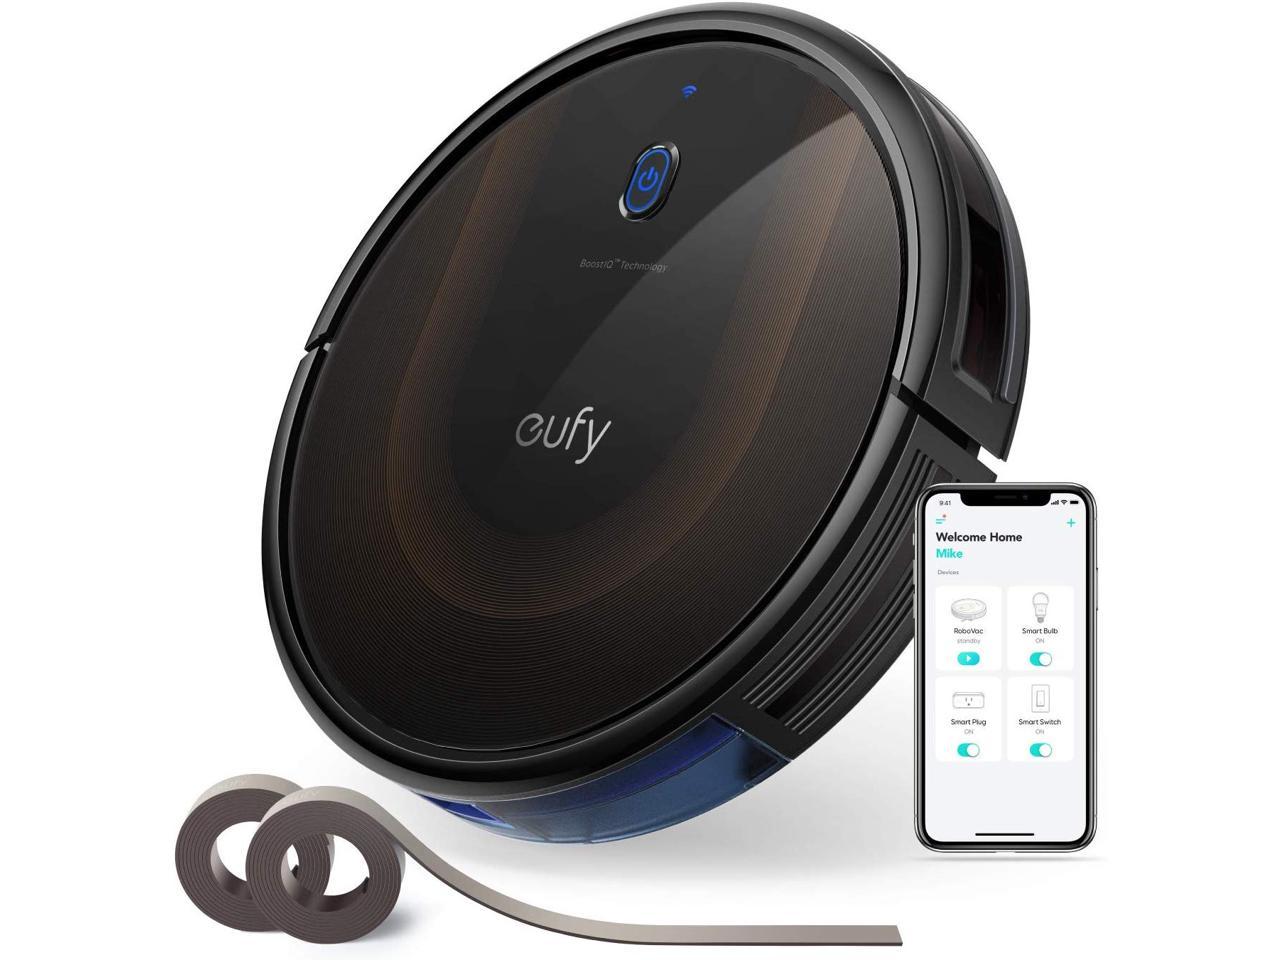 eufy BoostIQ RoboVac Cleaner, 30C MAX, Wi-Fi, Super-Thin, 2000Pa Suction, Boundary Strips Included, Self-Charging, Black